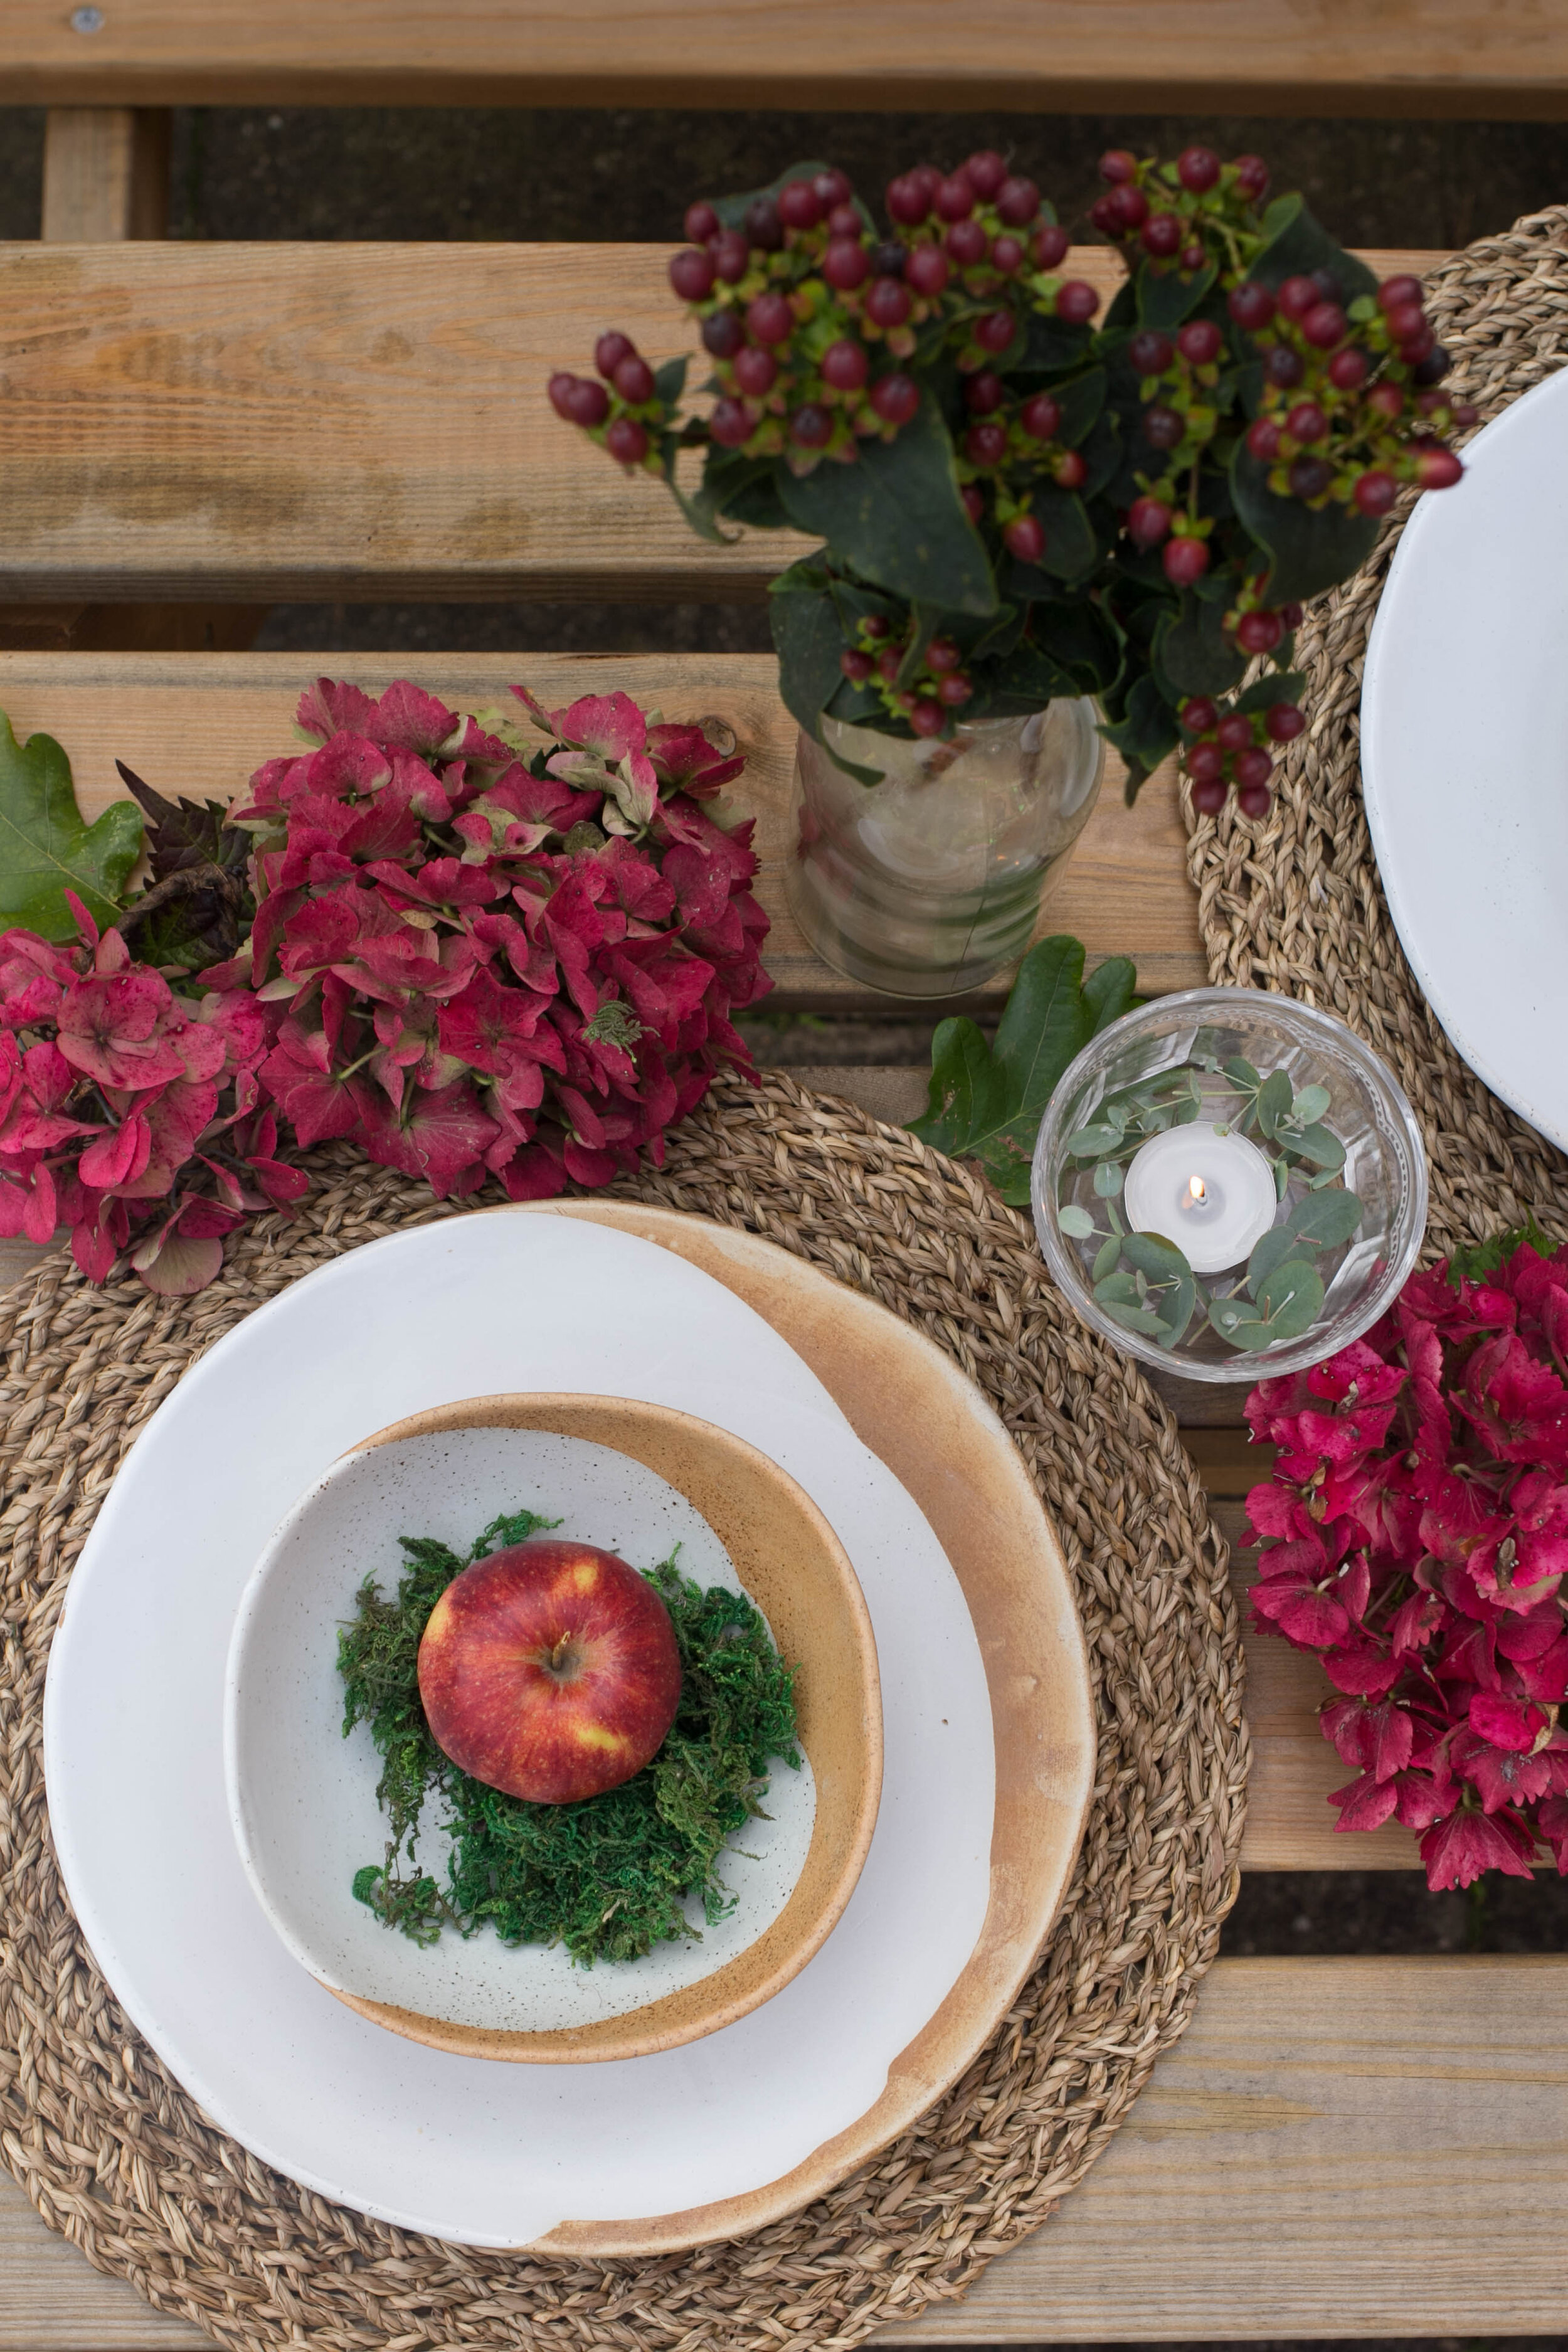 Autumnal Tablescape | The Mother Cooker